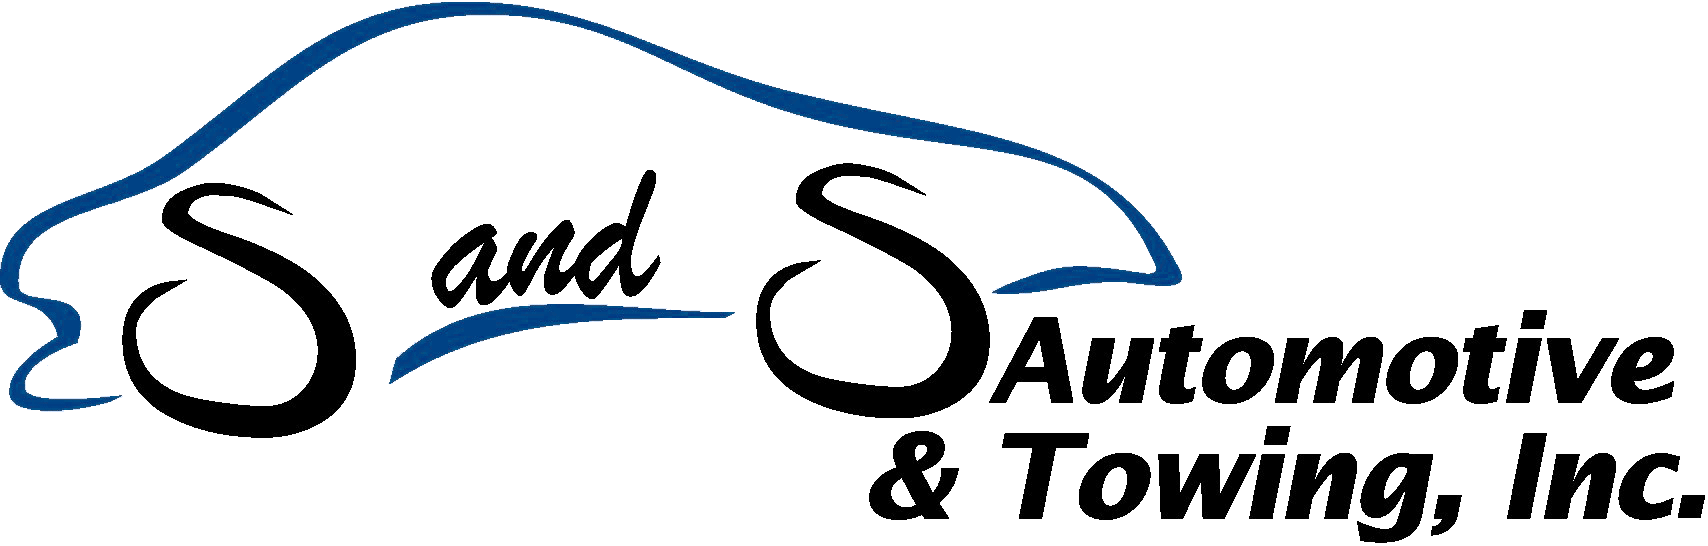 S And S Automotive And Towing - S & S Automotive & Towing (1708x546)